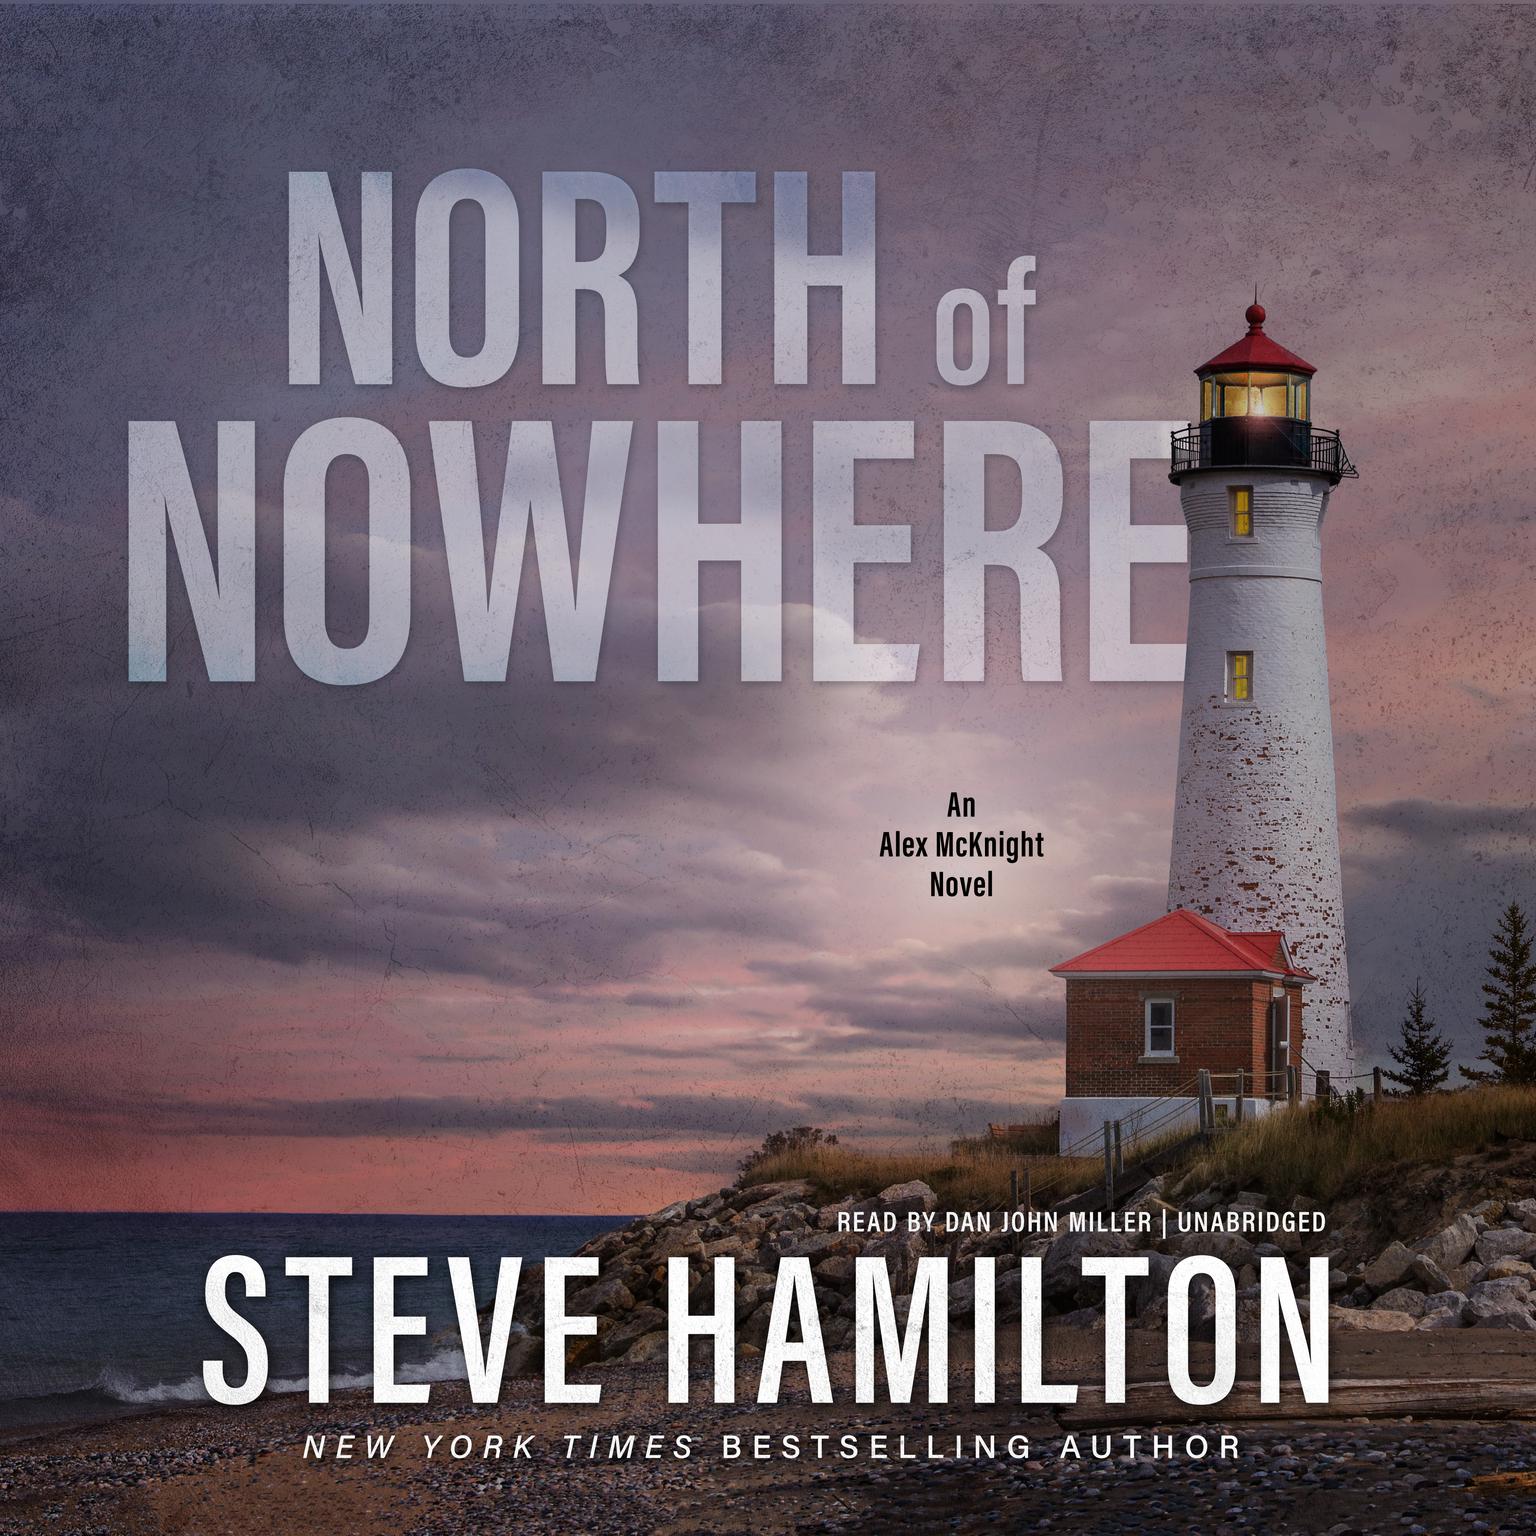 North of Nowhere Audiobook, by Steve Hamilton